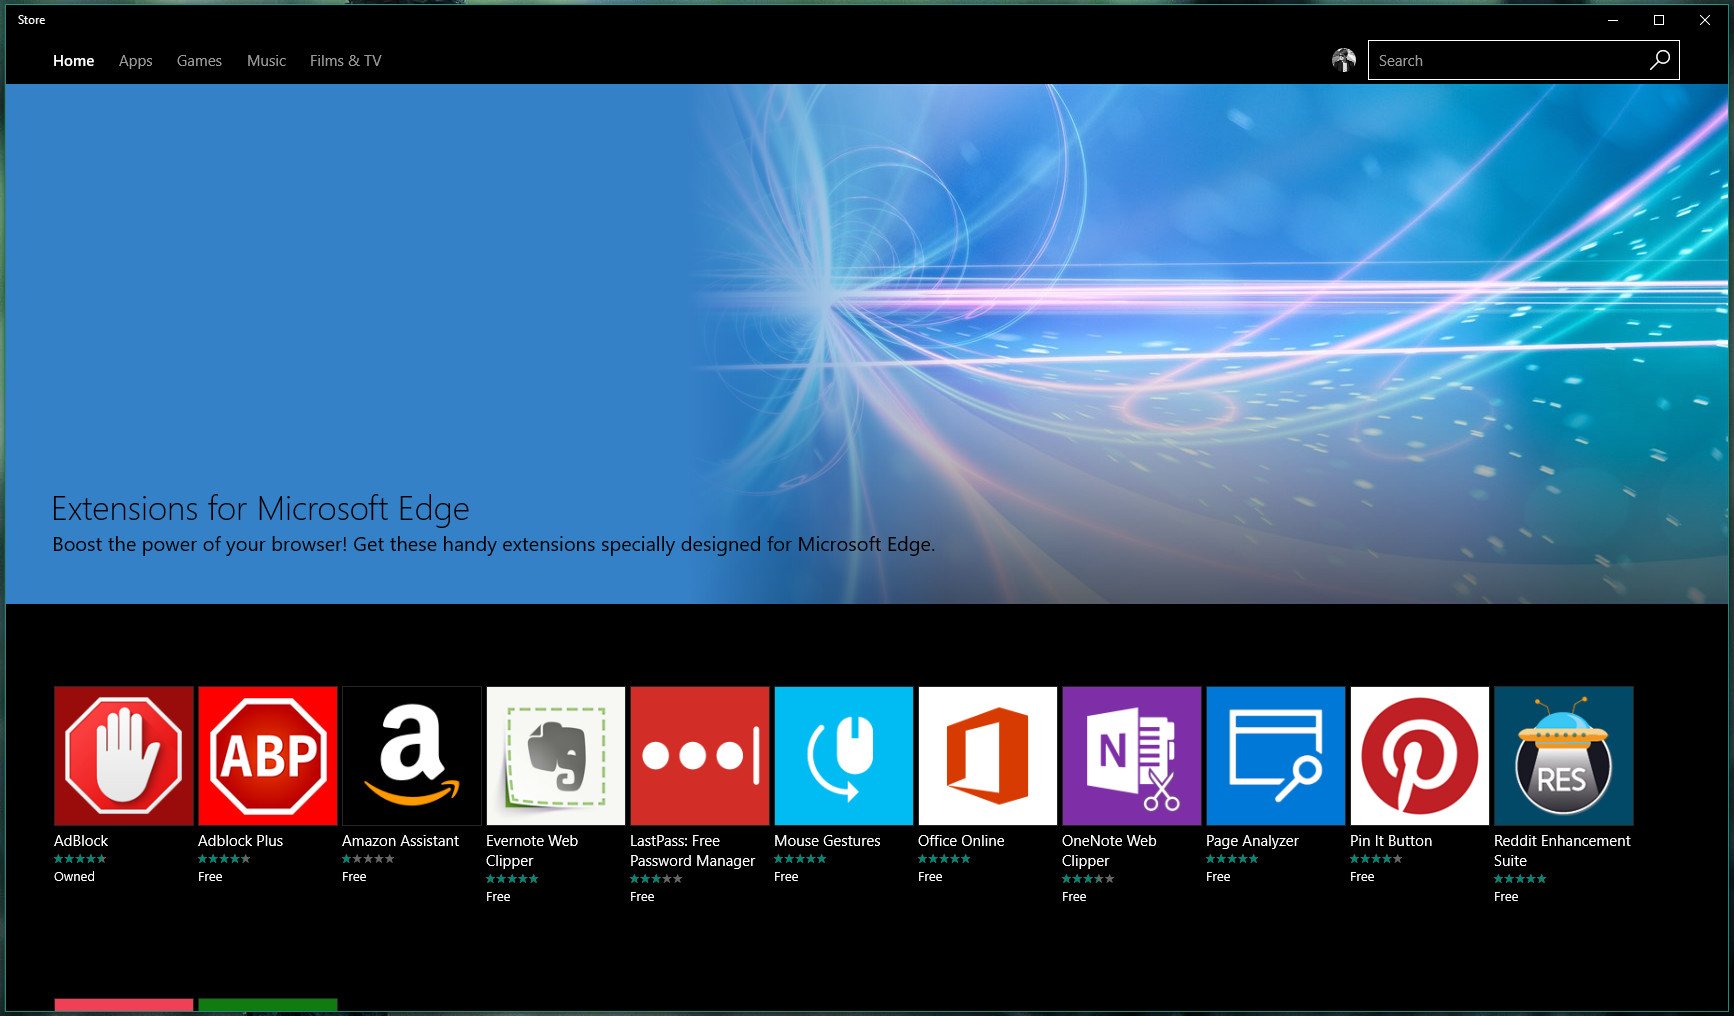 Windows Store extension page